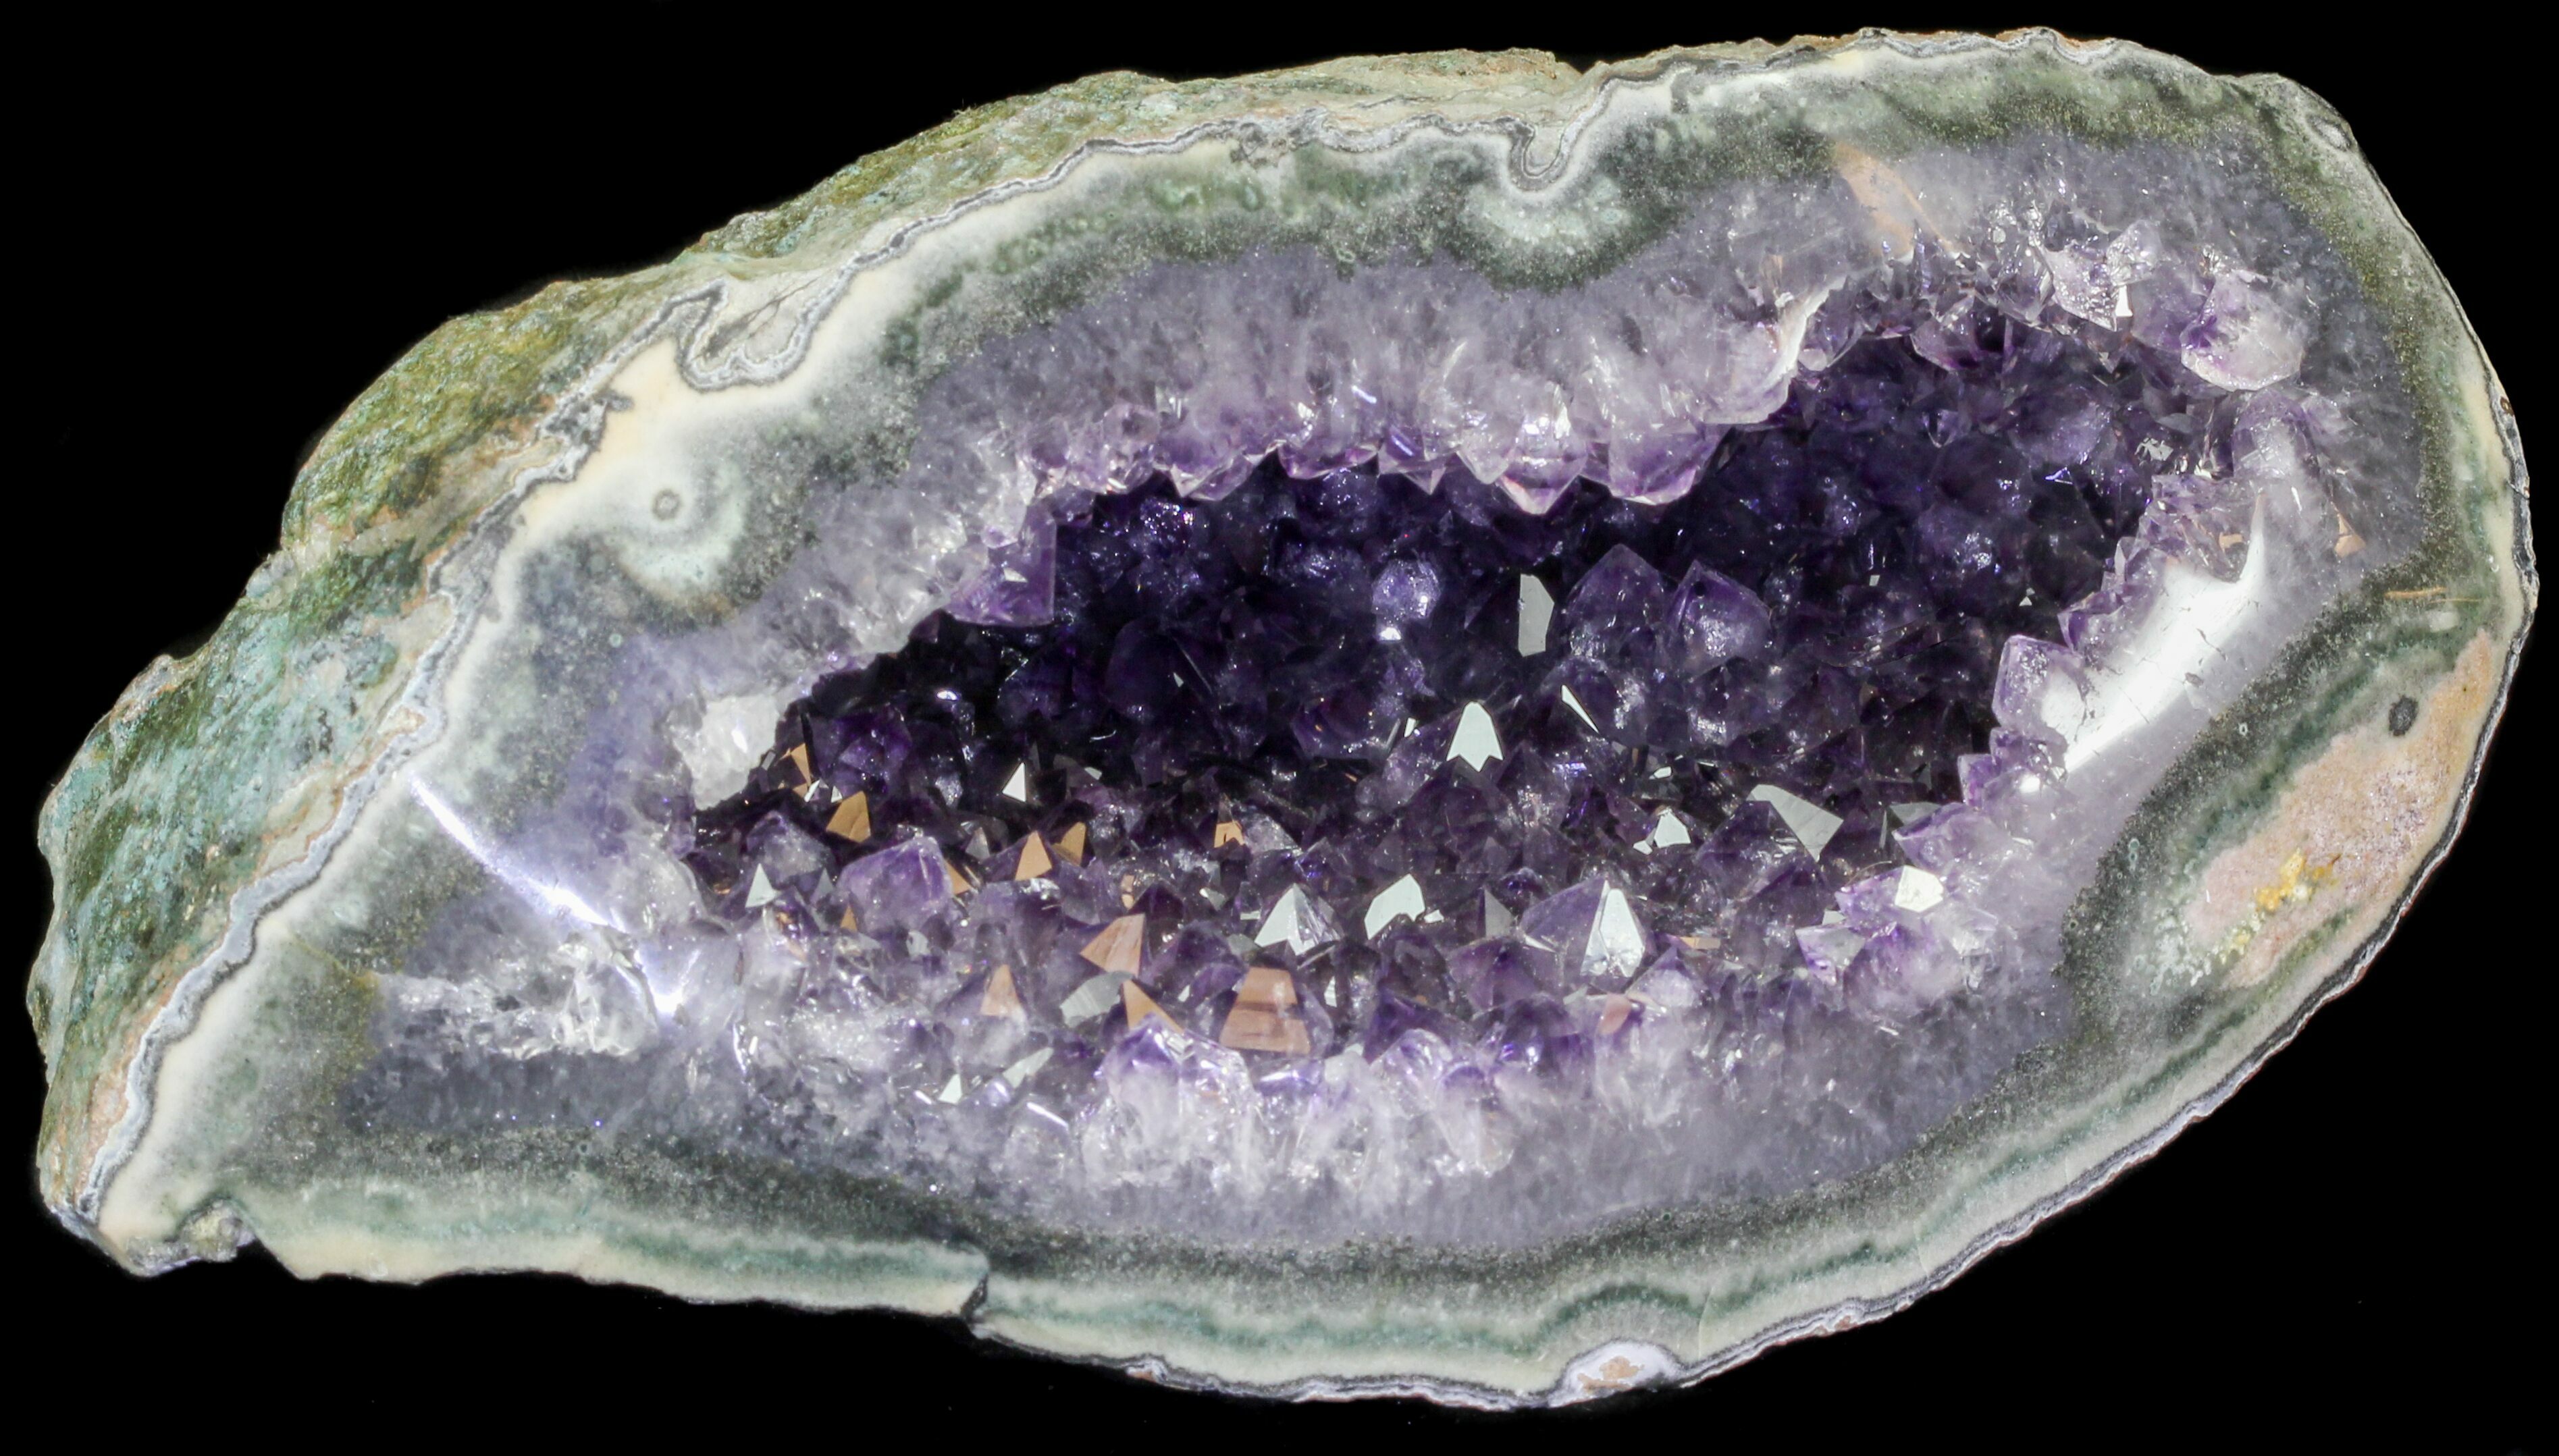 8" Gorgeous Amethyst Crystal Geode - Uruguay For Sale (#30904